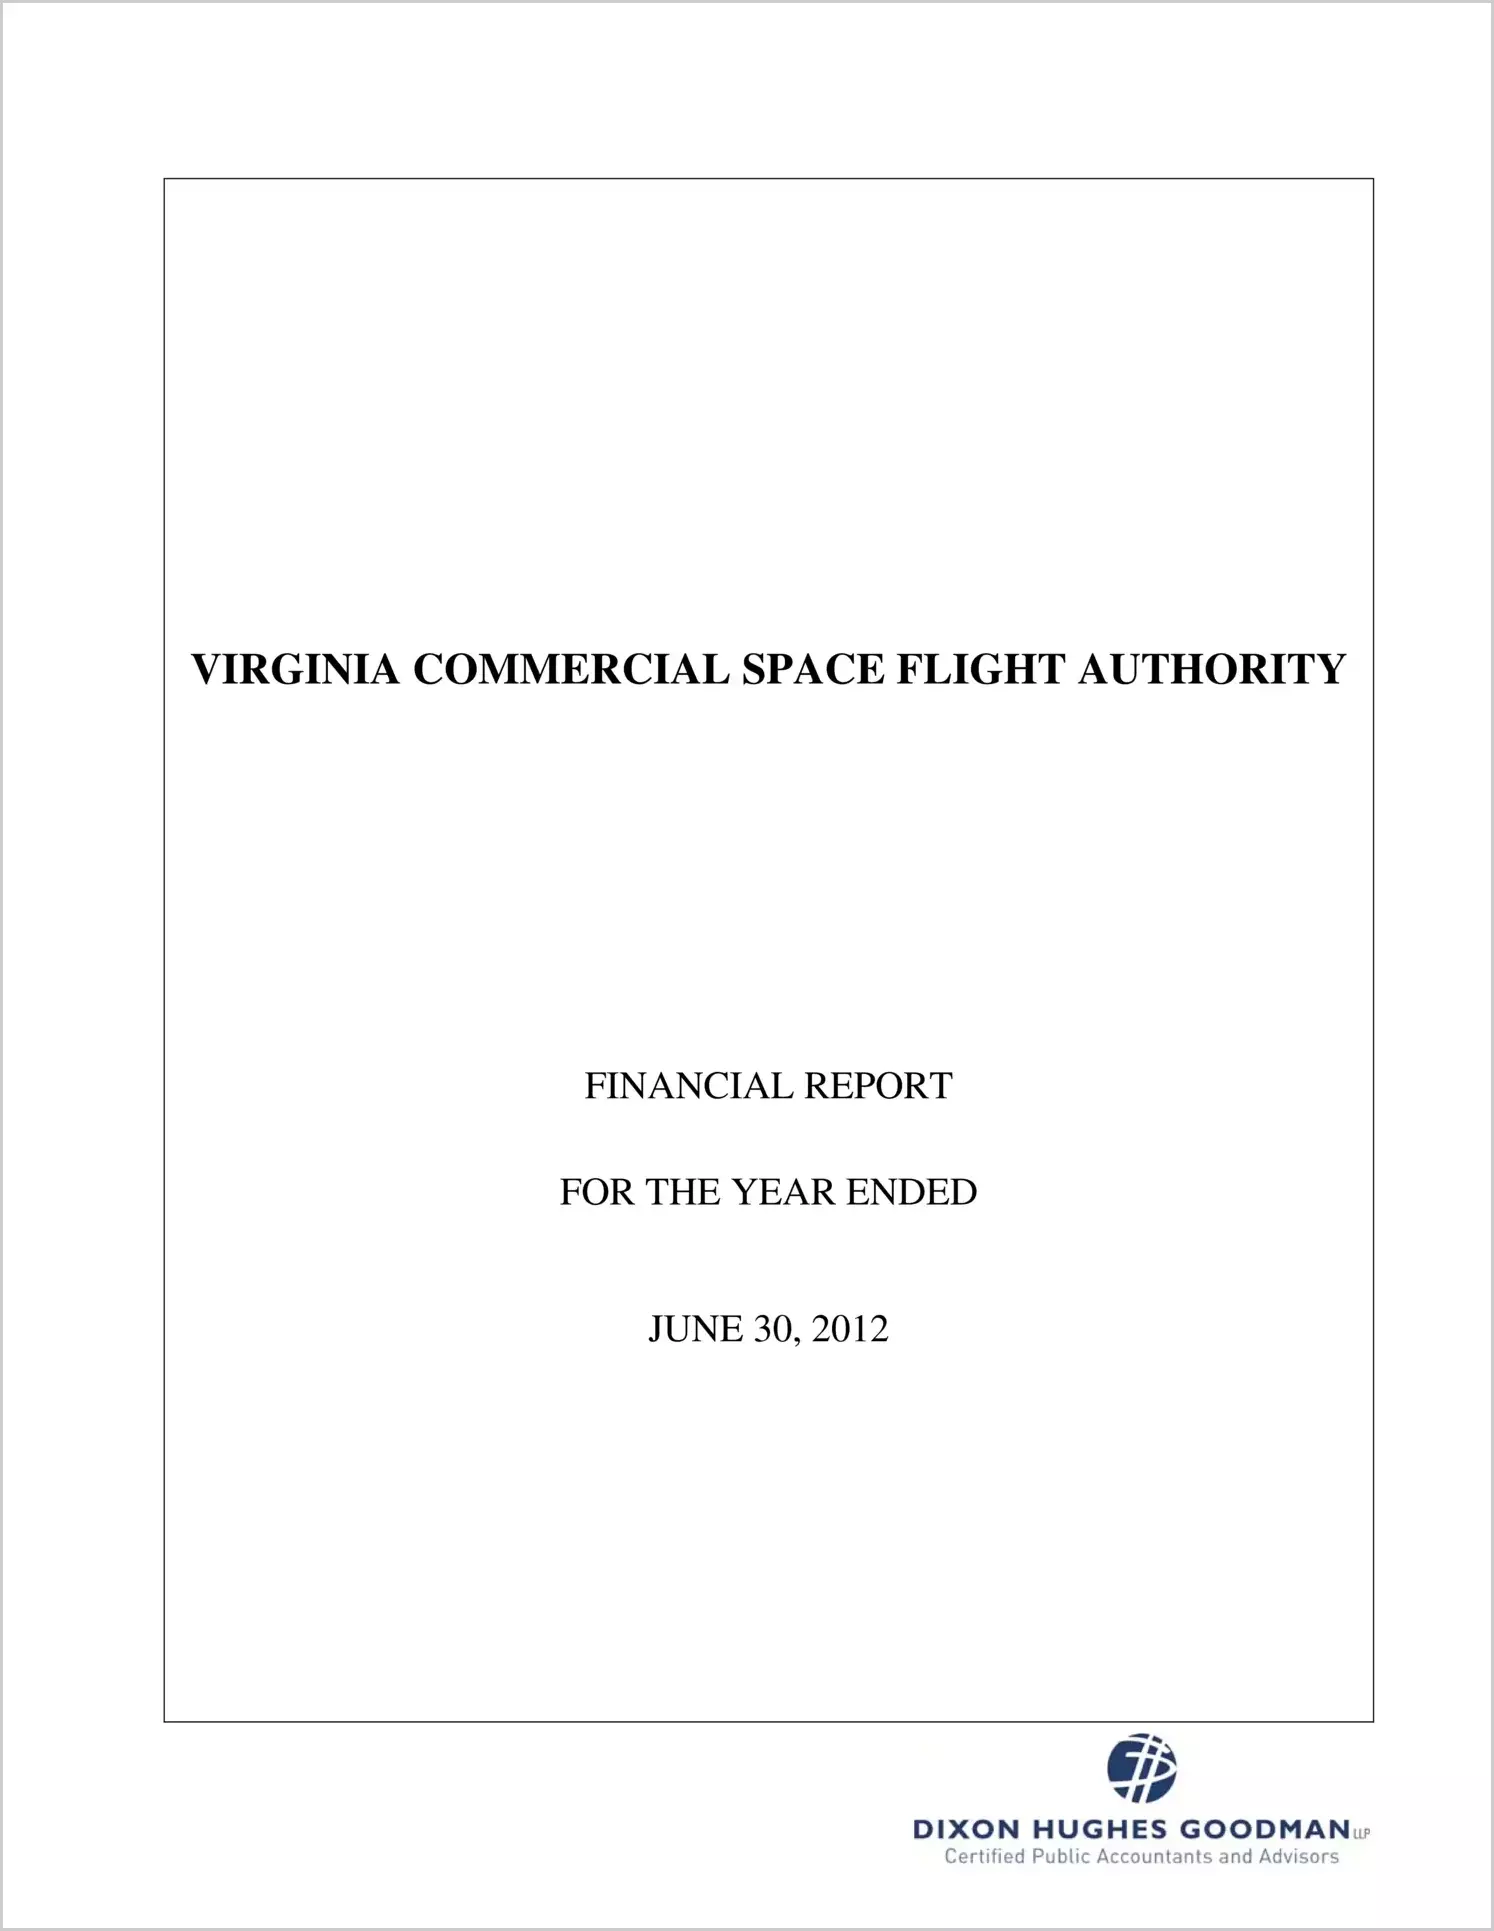 Virginia Commercial Space Flight Authority Financial Statements Report for the year ended June 30, 2012